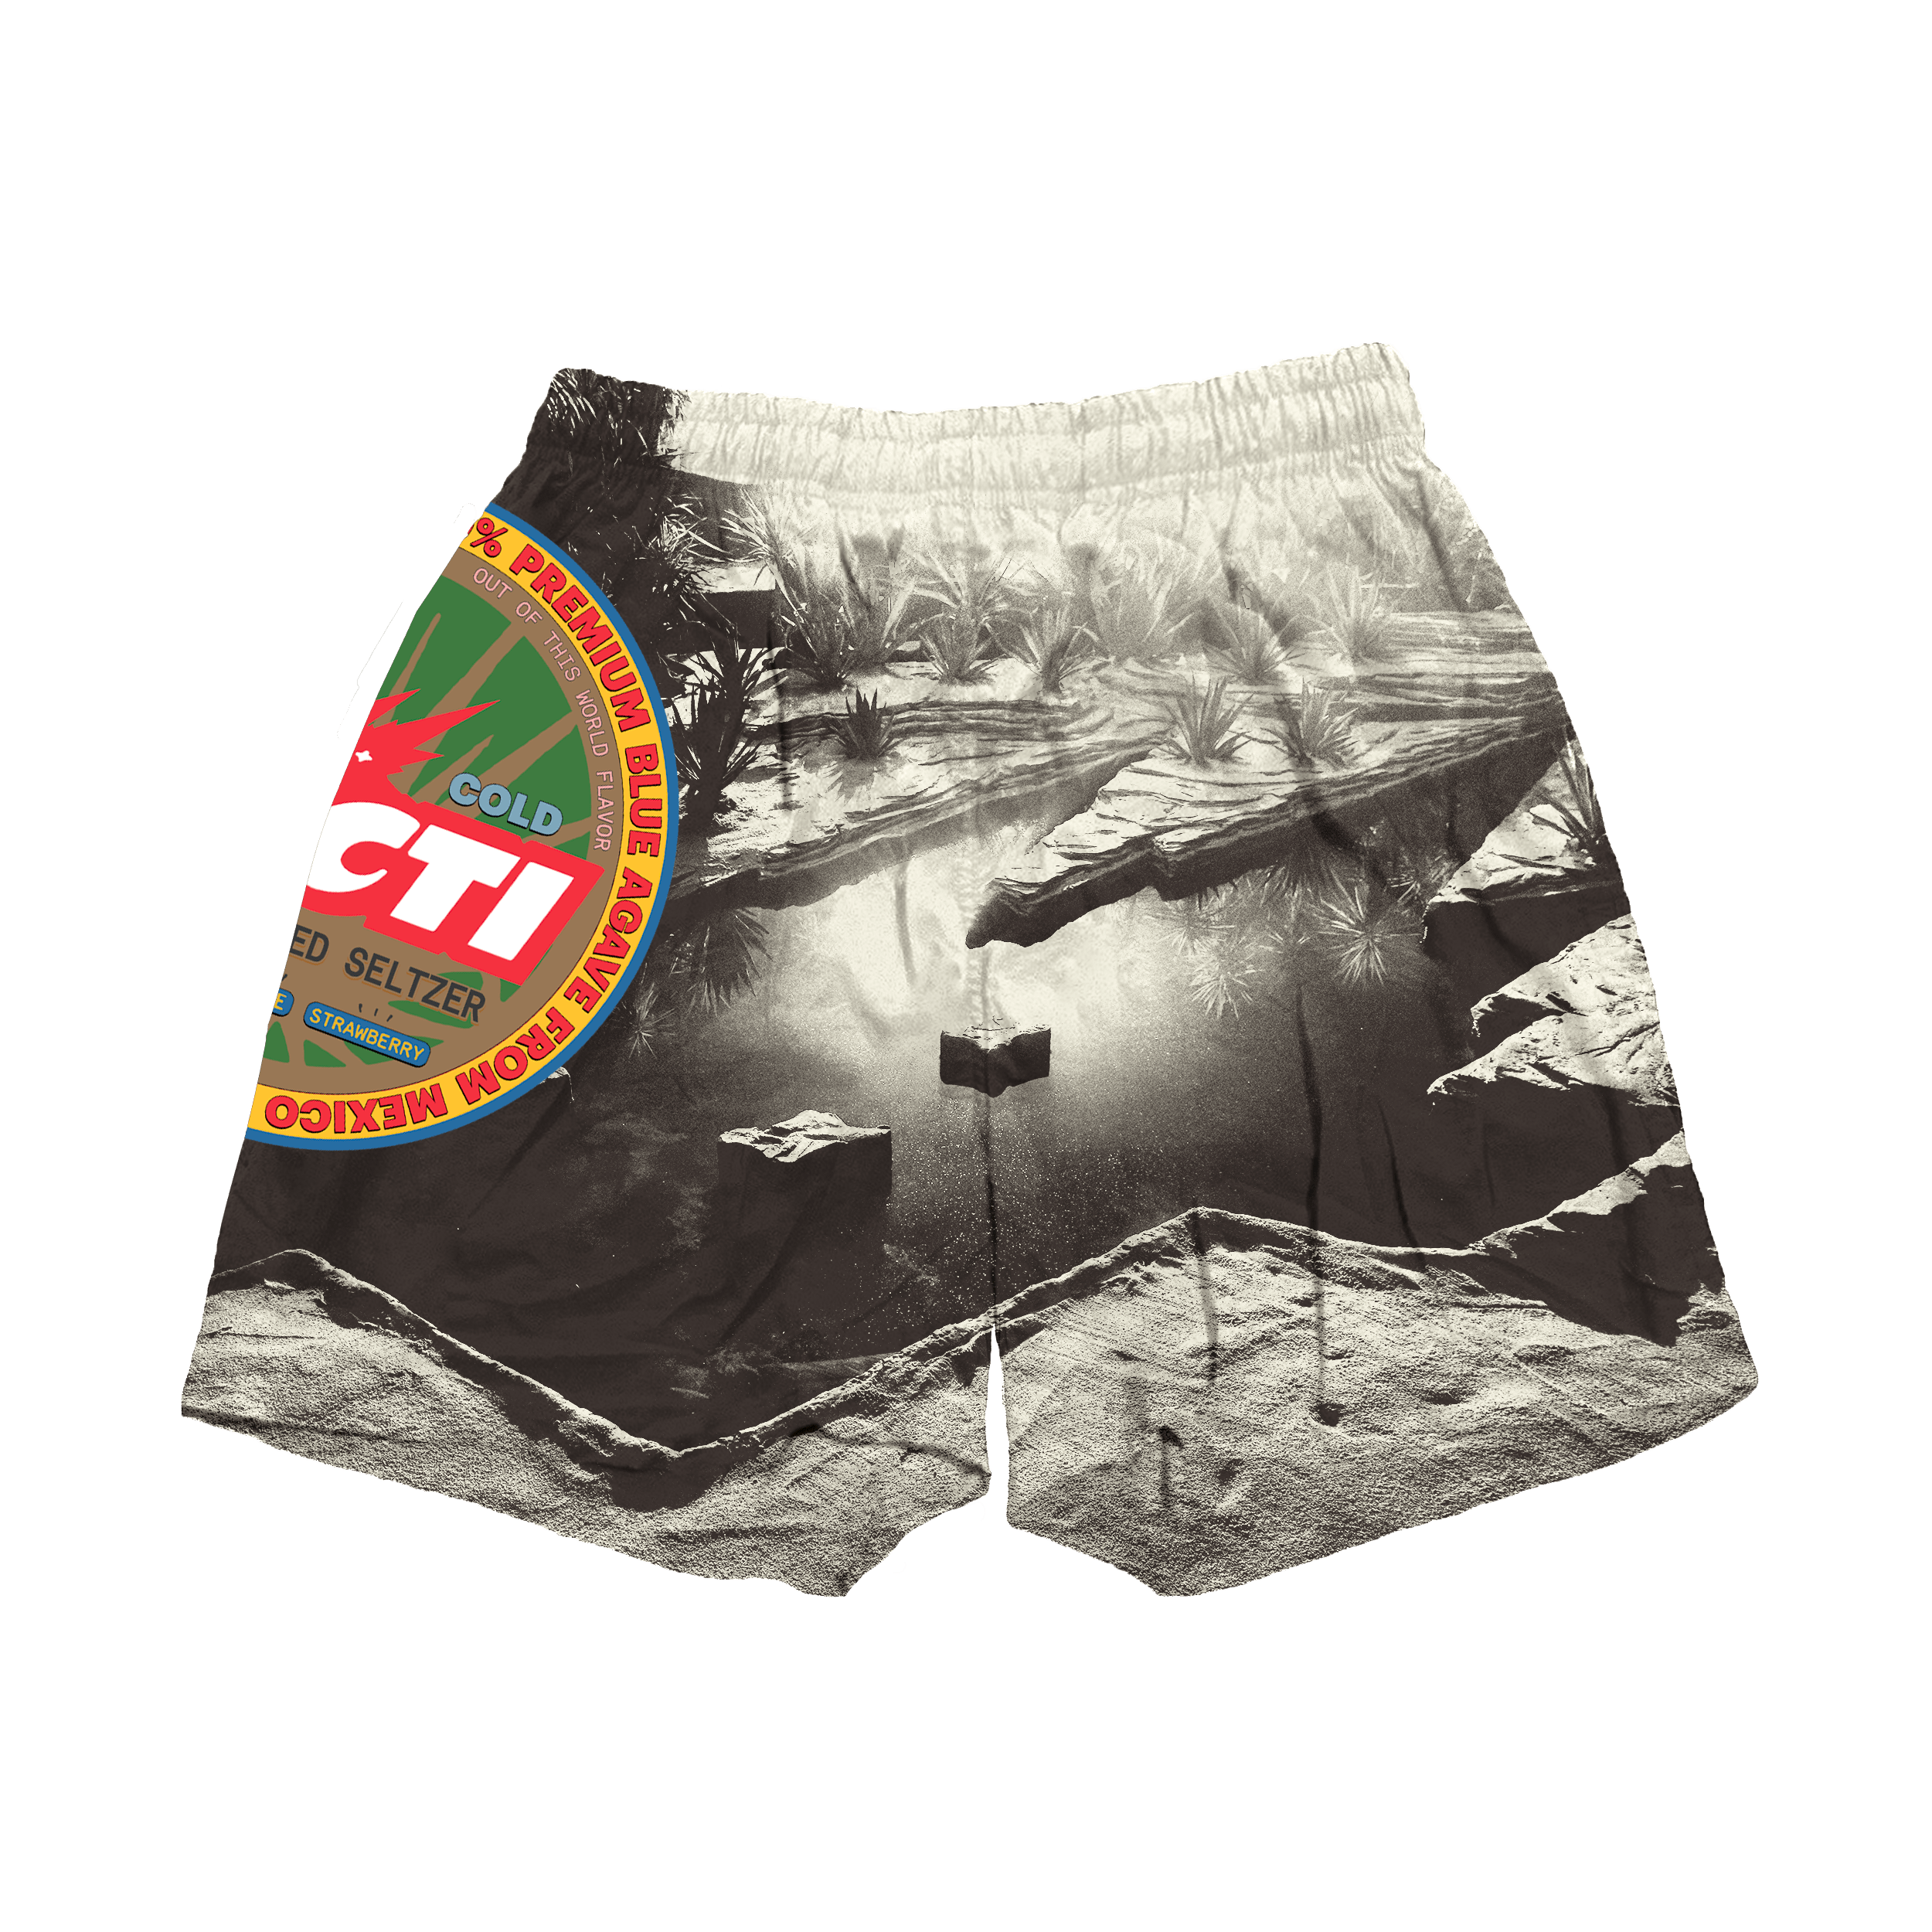 CACTI OASIS OUTDOOR SHORTS